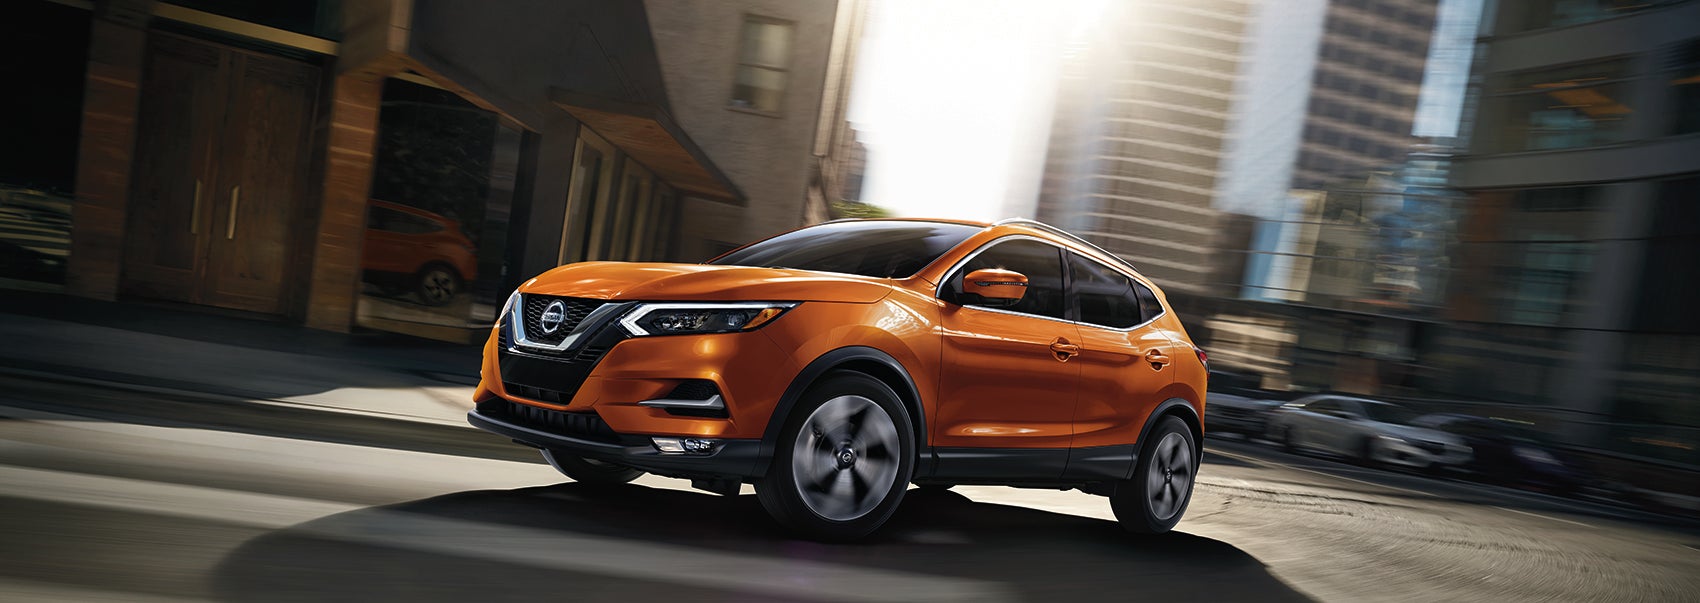 Nissan Rogue sport lease deals Indianapolis, IN